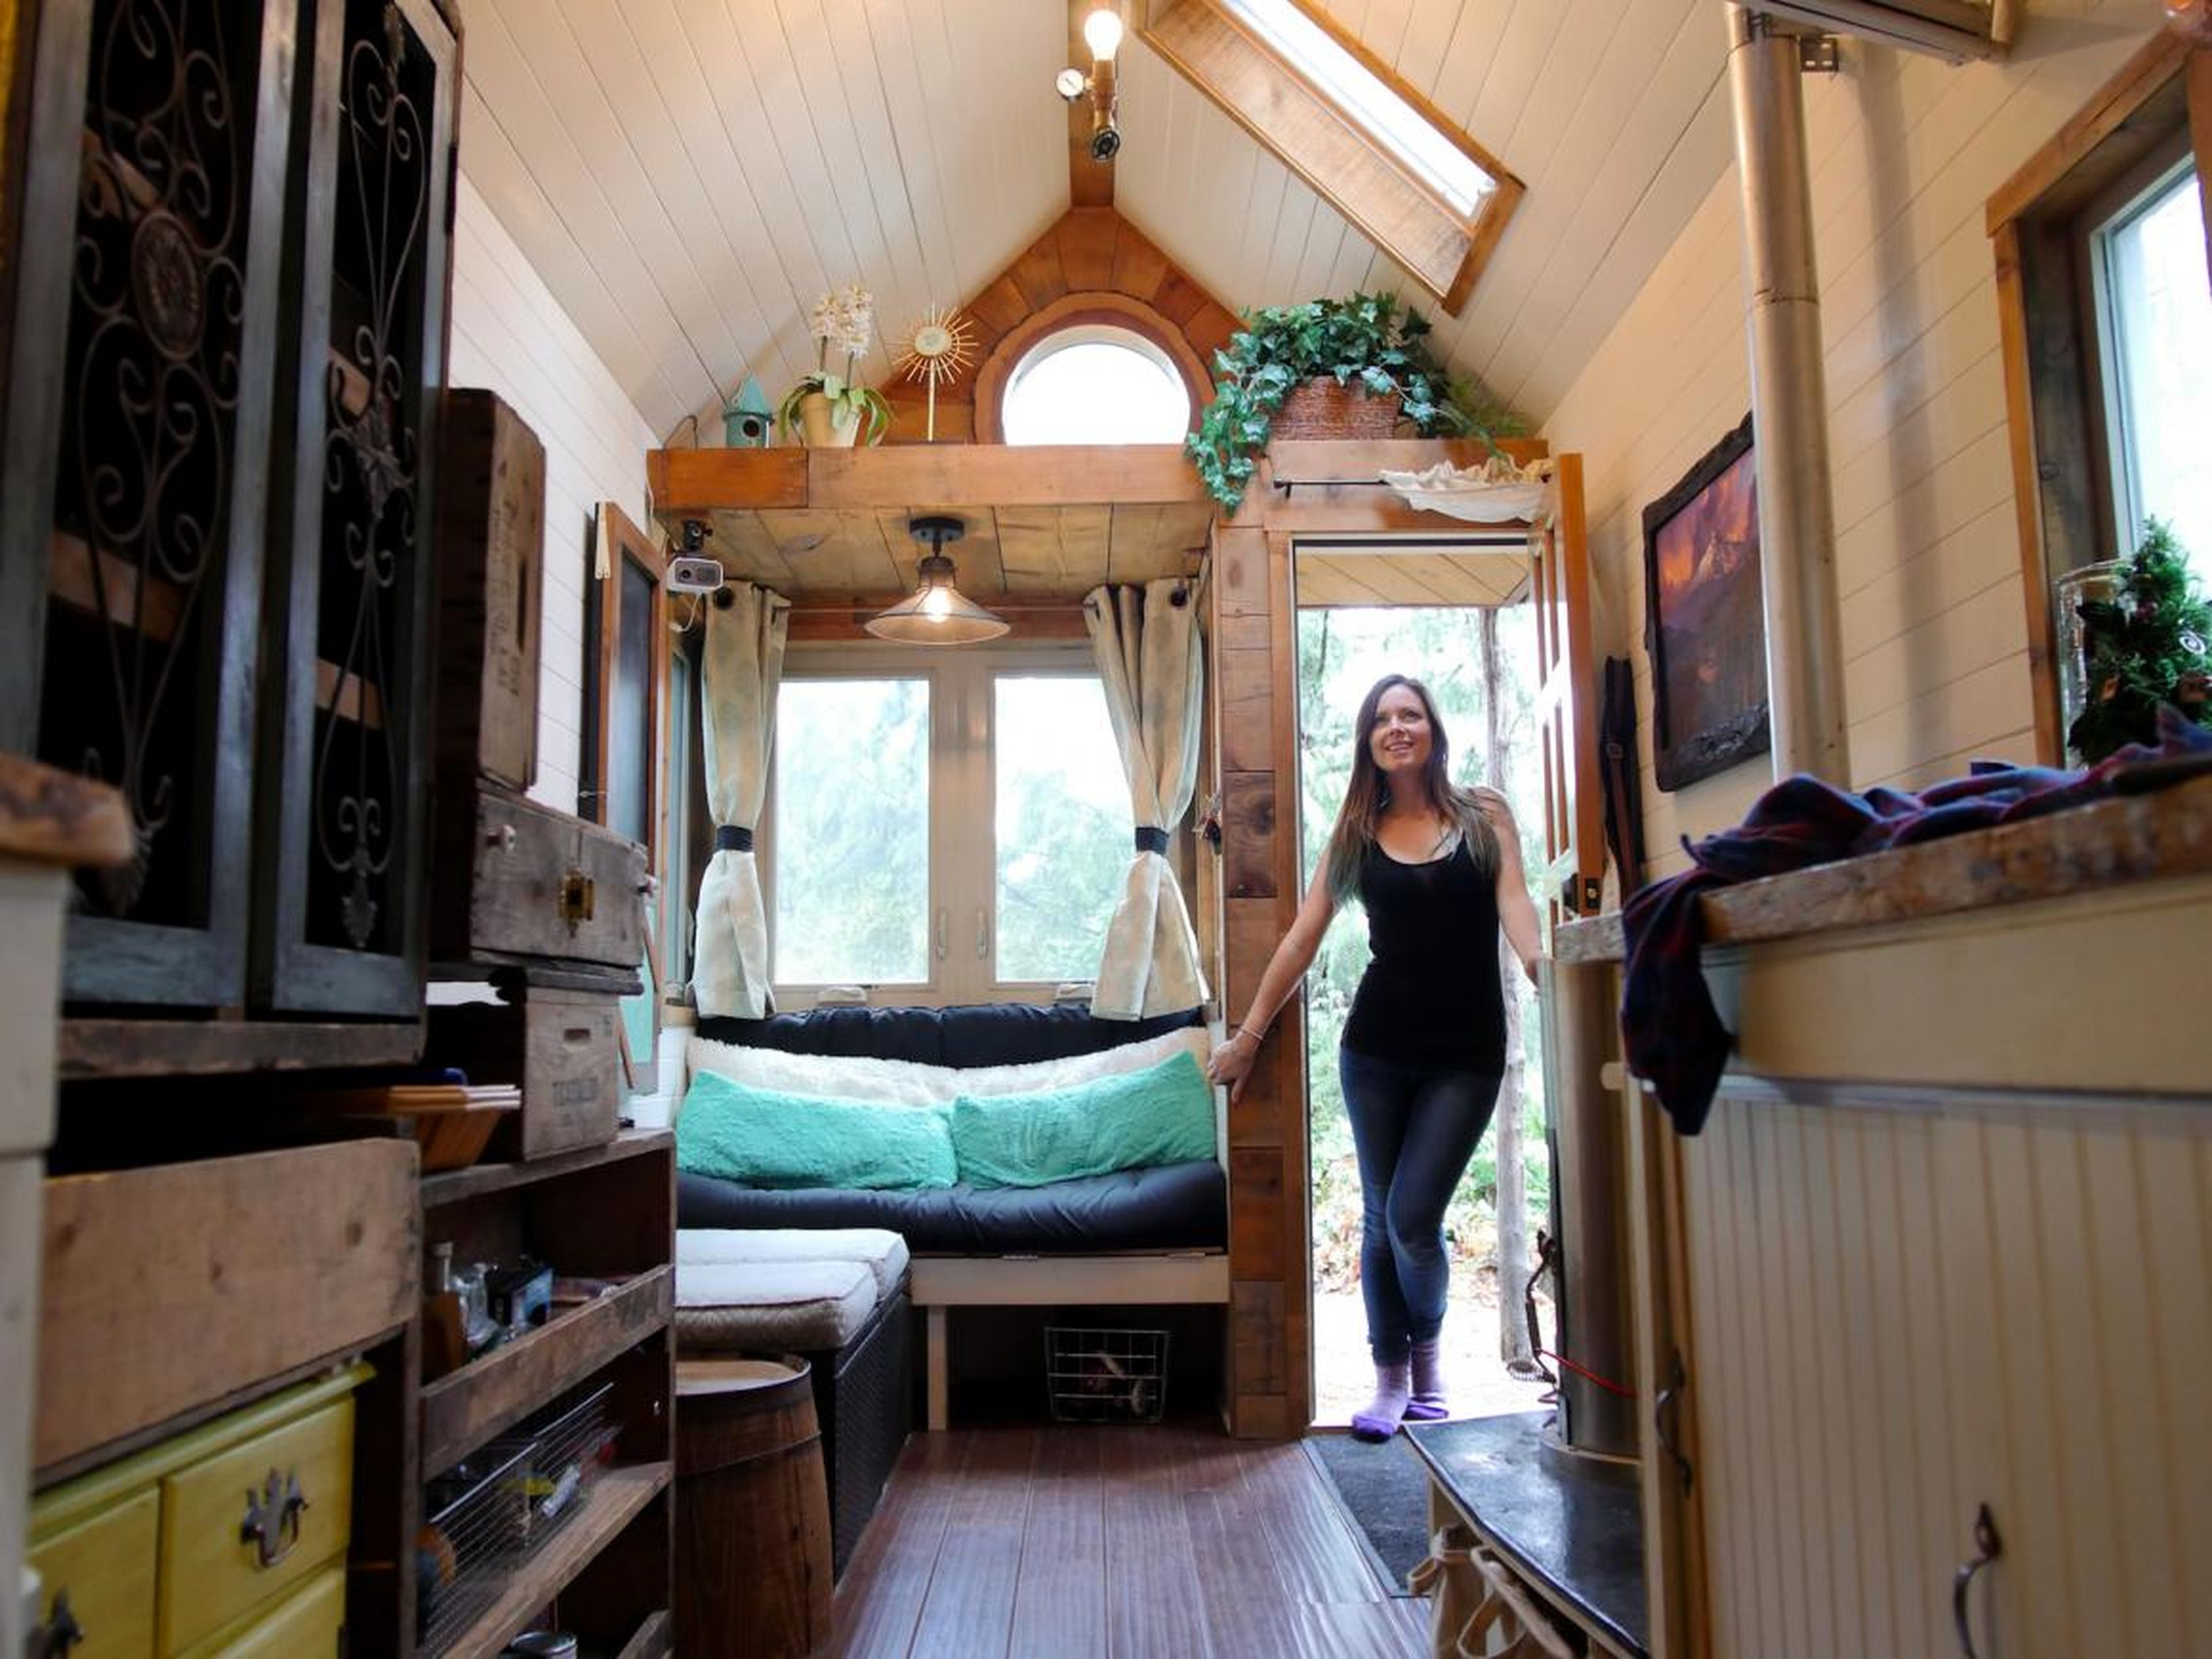 Jenna also found a few challenges to living small. "I don't have guests over very often and I had to make some compromises when it comes to creature comforts," she said.